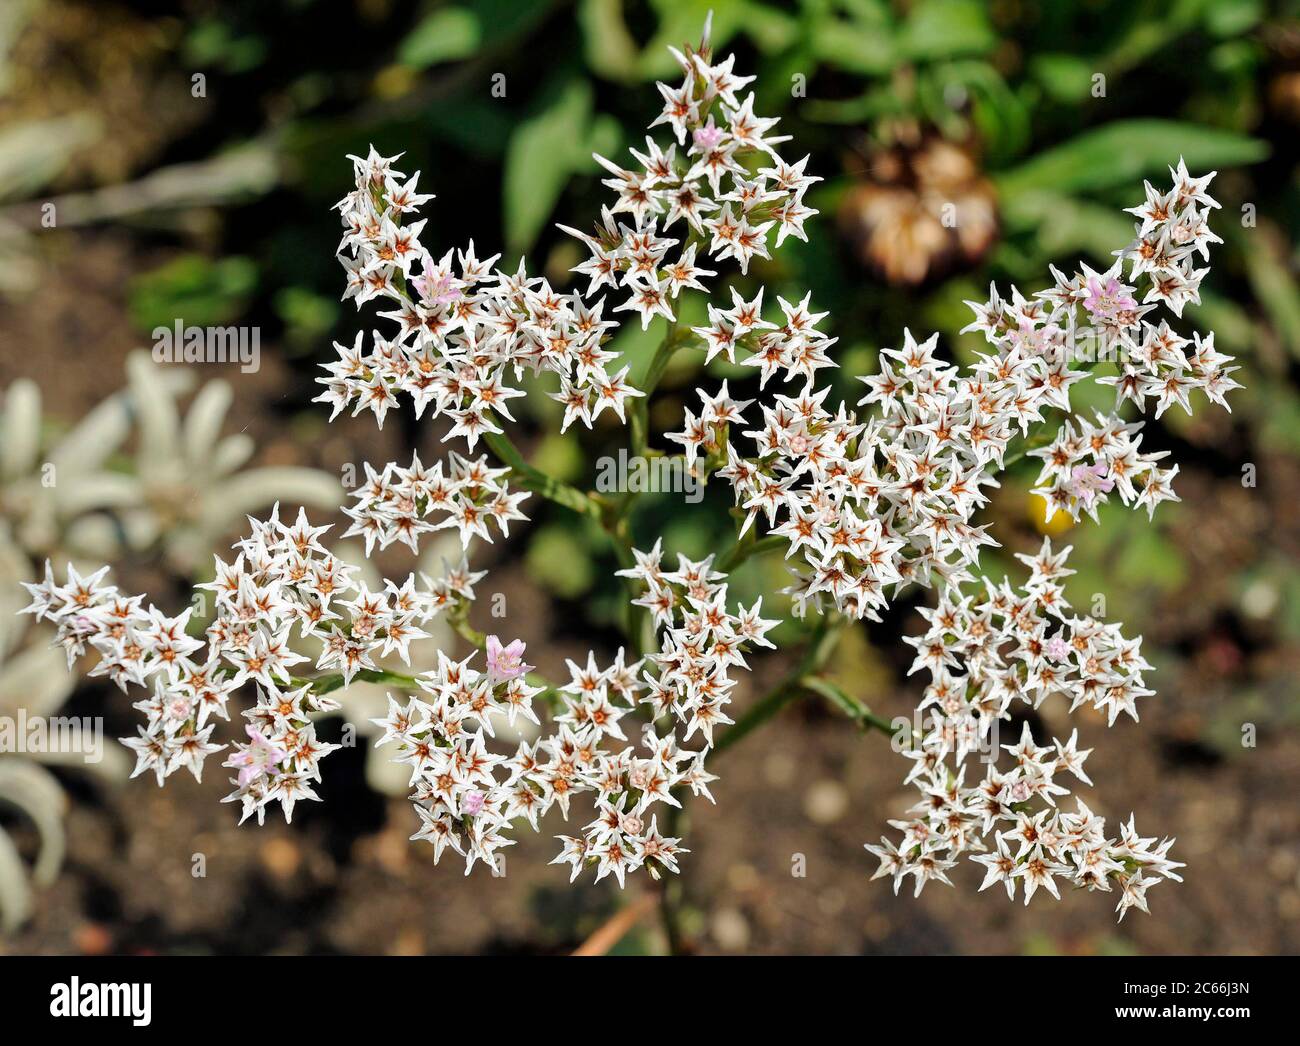 Flowering umbels of Goniolimon tataricum in summer, perennial native to the steppes of South East Europe, Russia and Asia, can be used both as cut and dried flowers Stock Photo